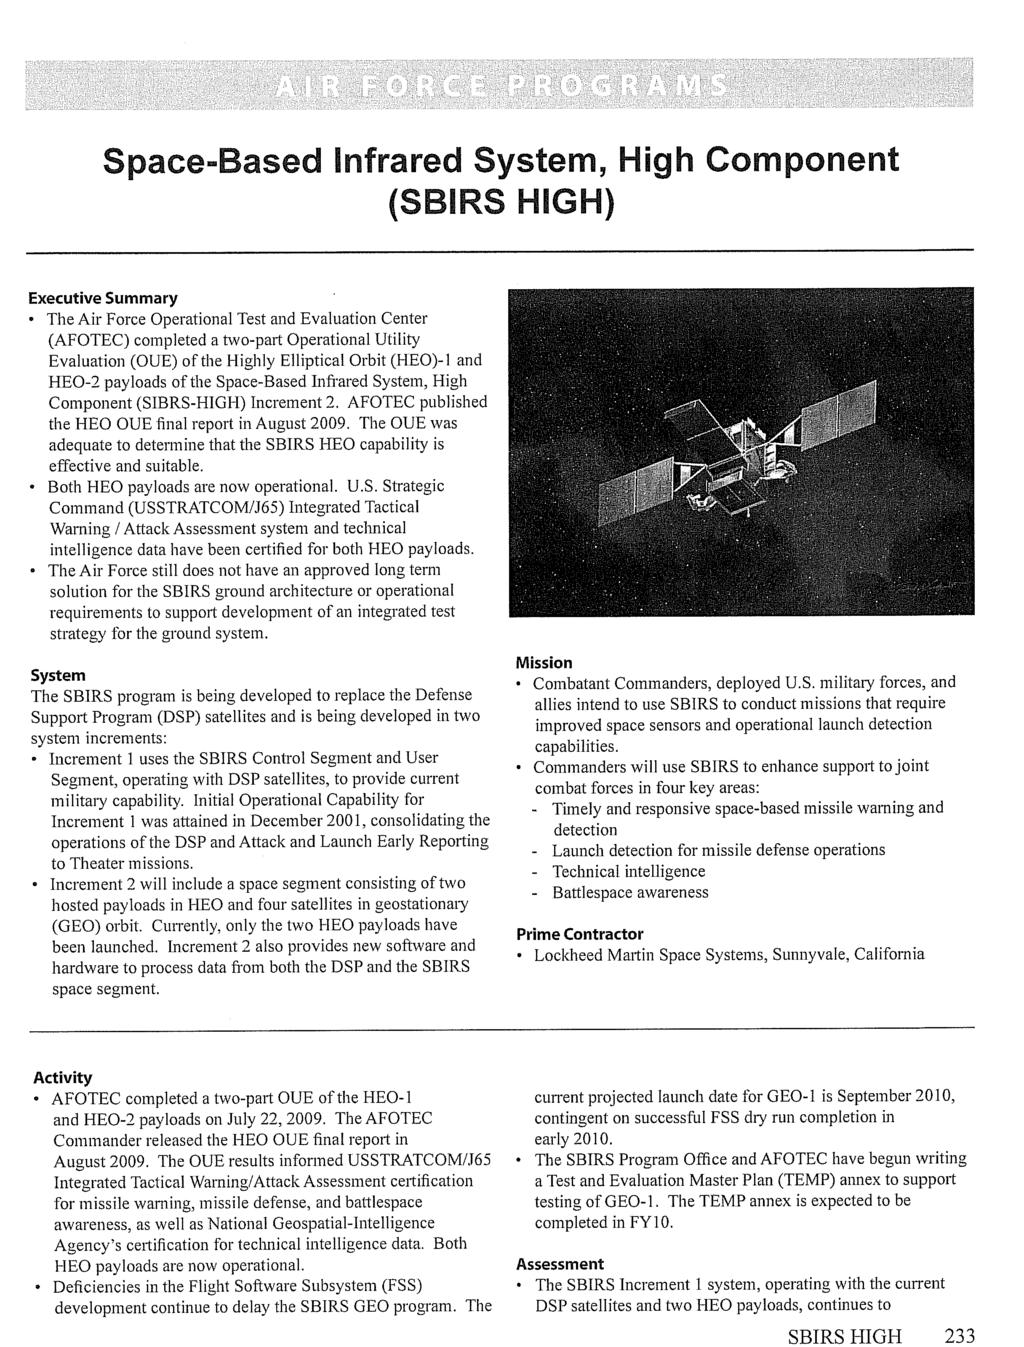 Space-Based Infrared System, High Component (SBIRS HIG1) Executive Summary The Air Force Operational Test and Evaluation Center (AFOTEC) completed a two-part Operational Utility Evaluation (OUE) of